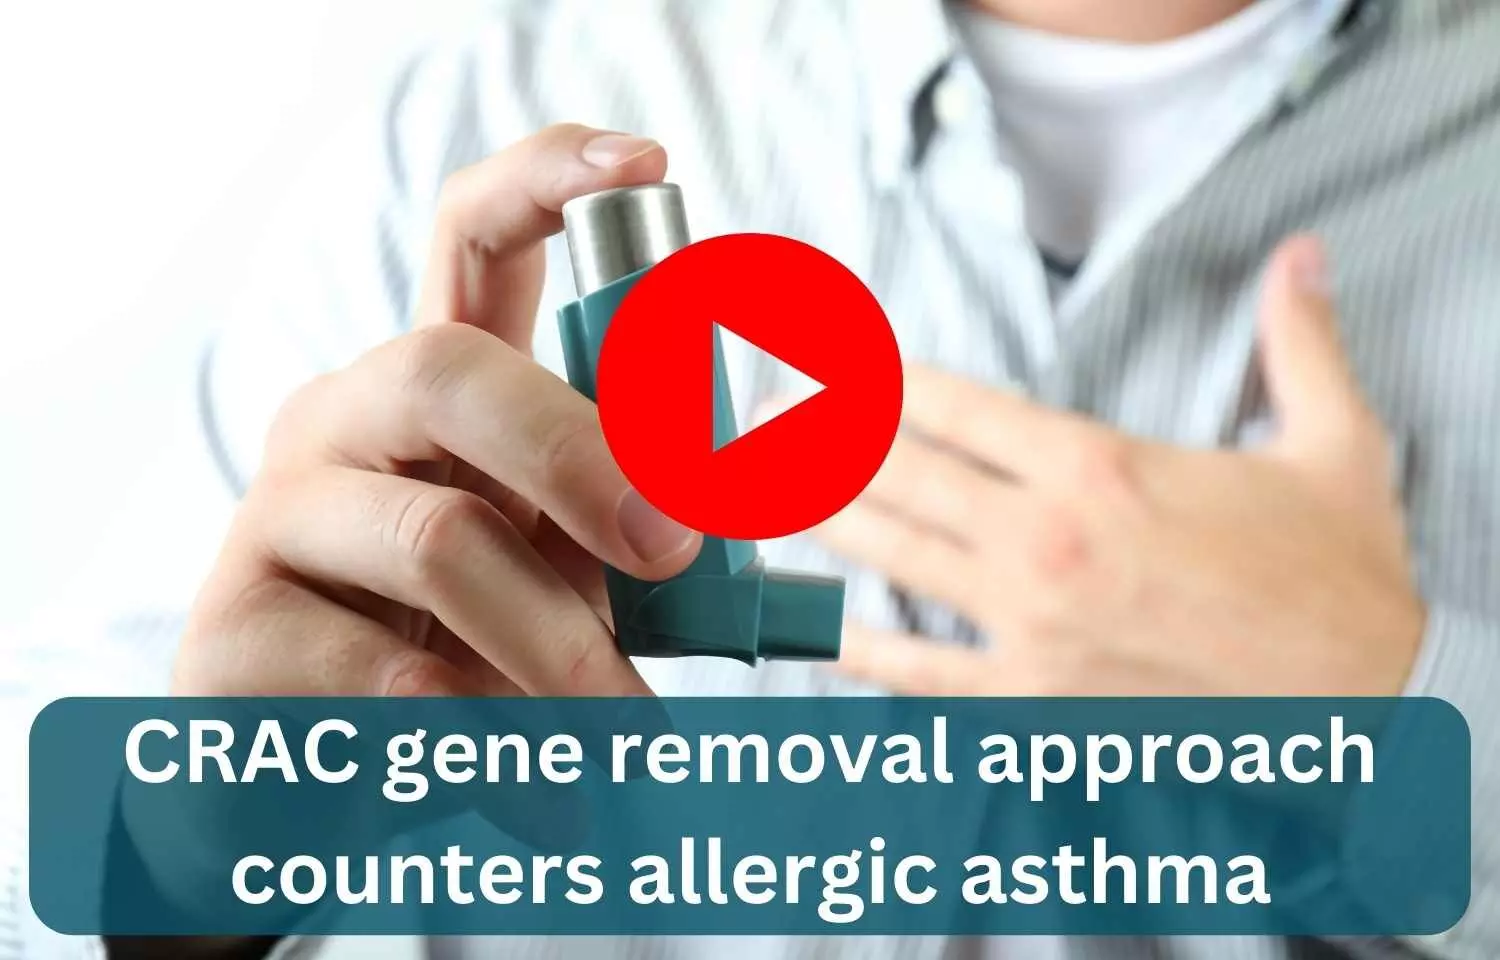 CRAC gene removal approach counters allergic asthma